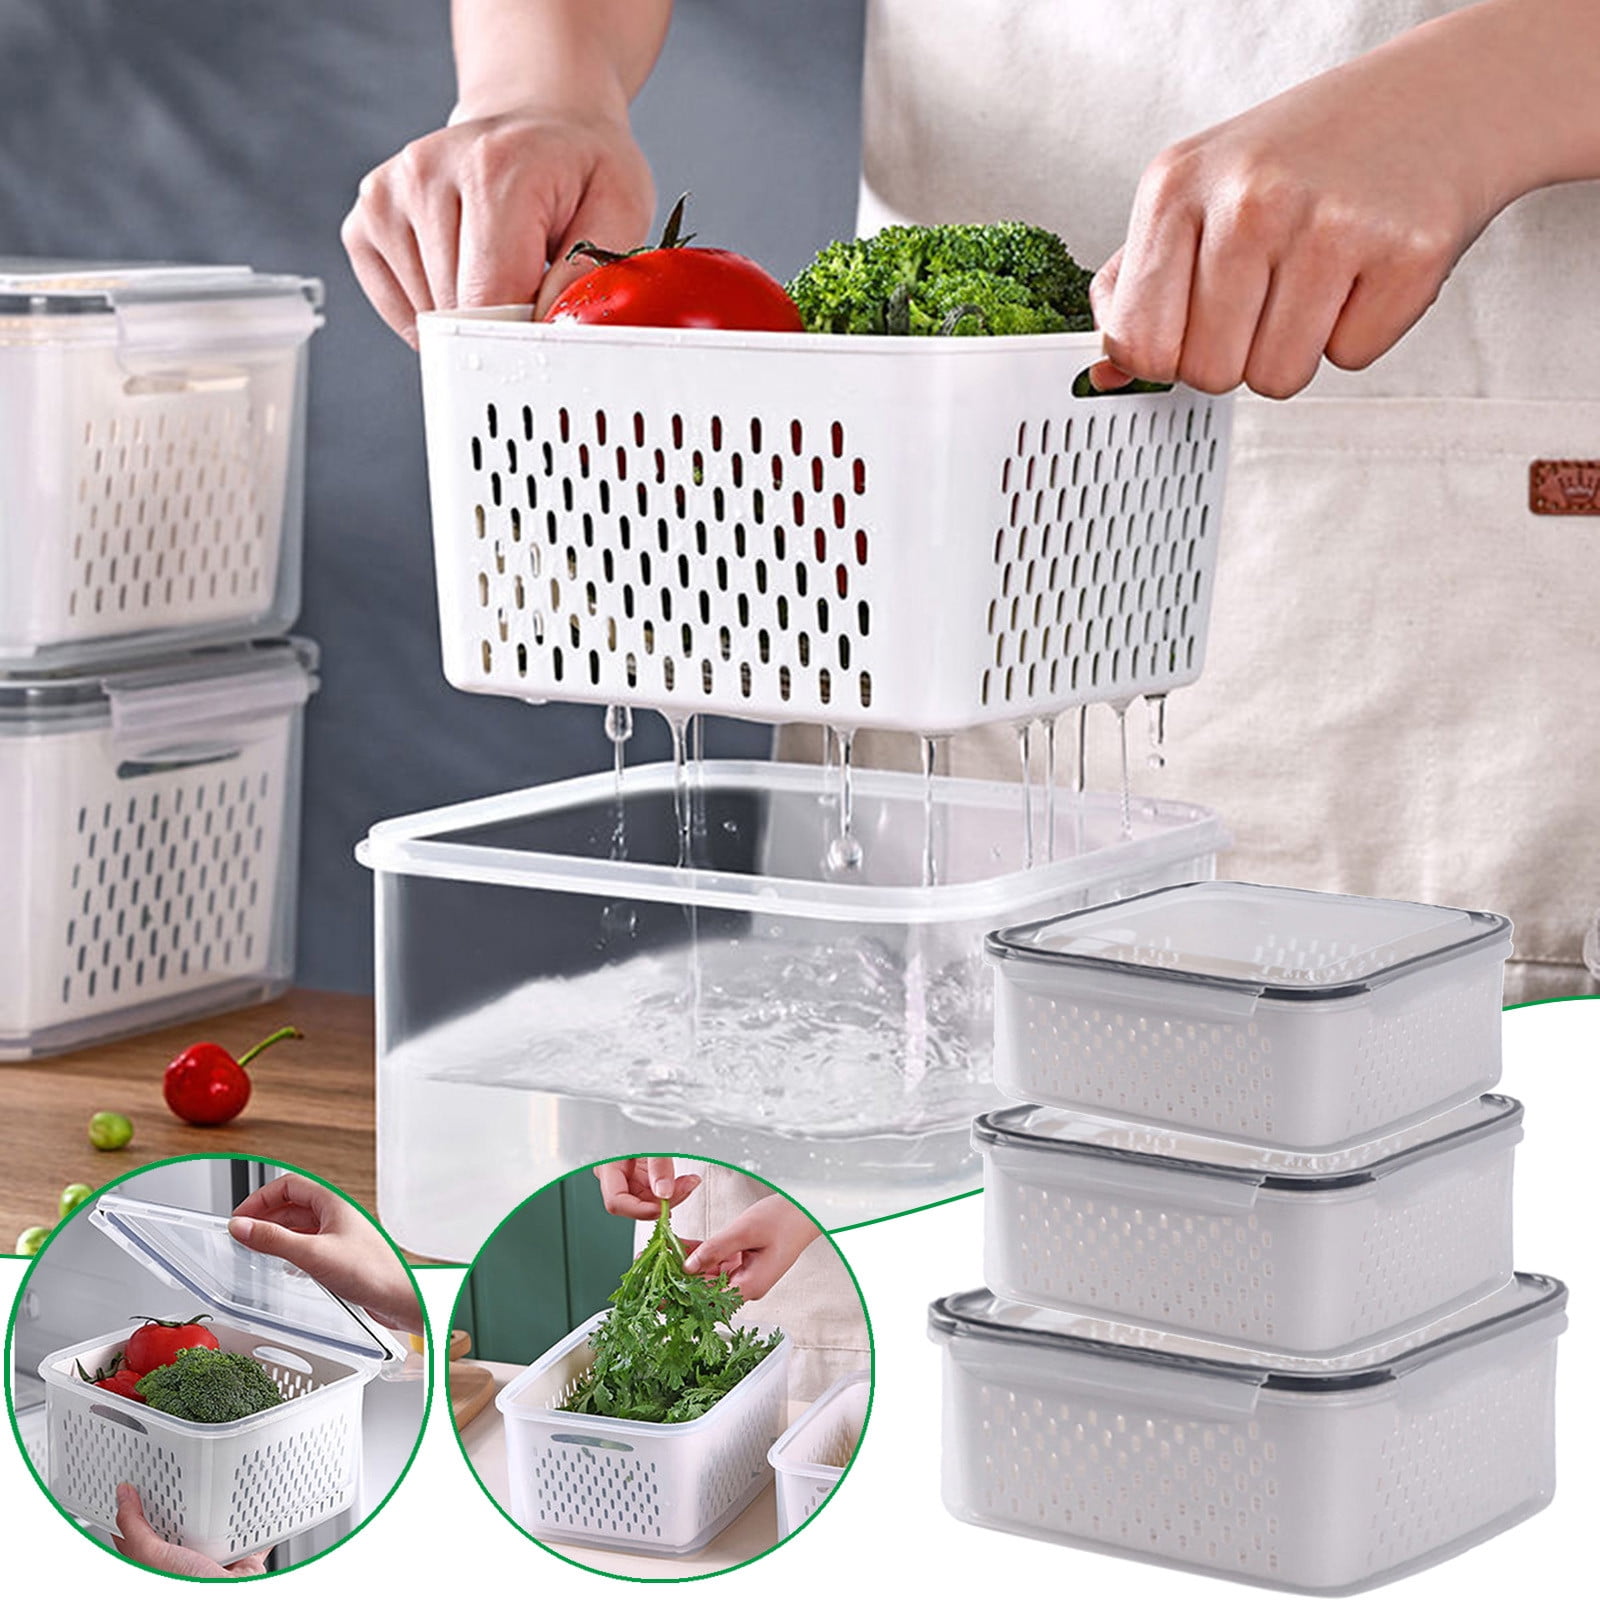 Refrigerator Food Storage Containers Vegetable Fruit Drain Basket